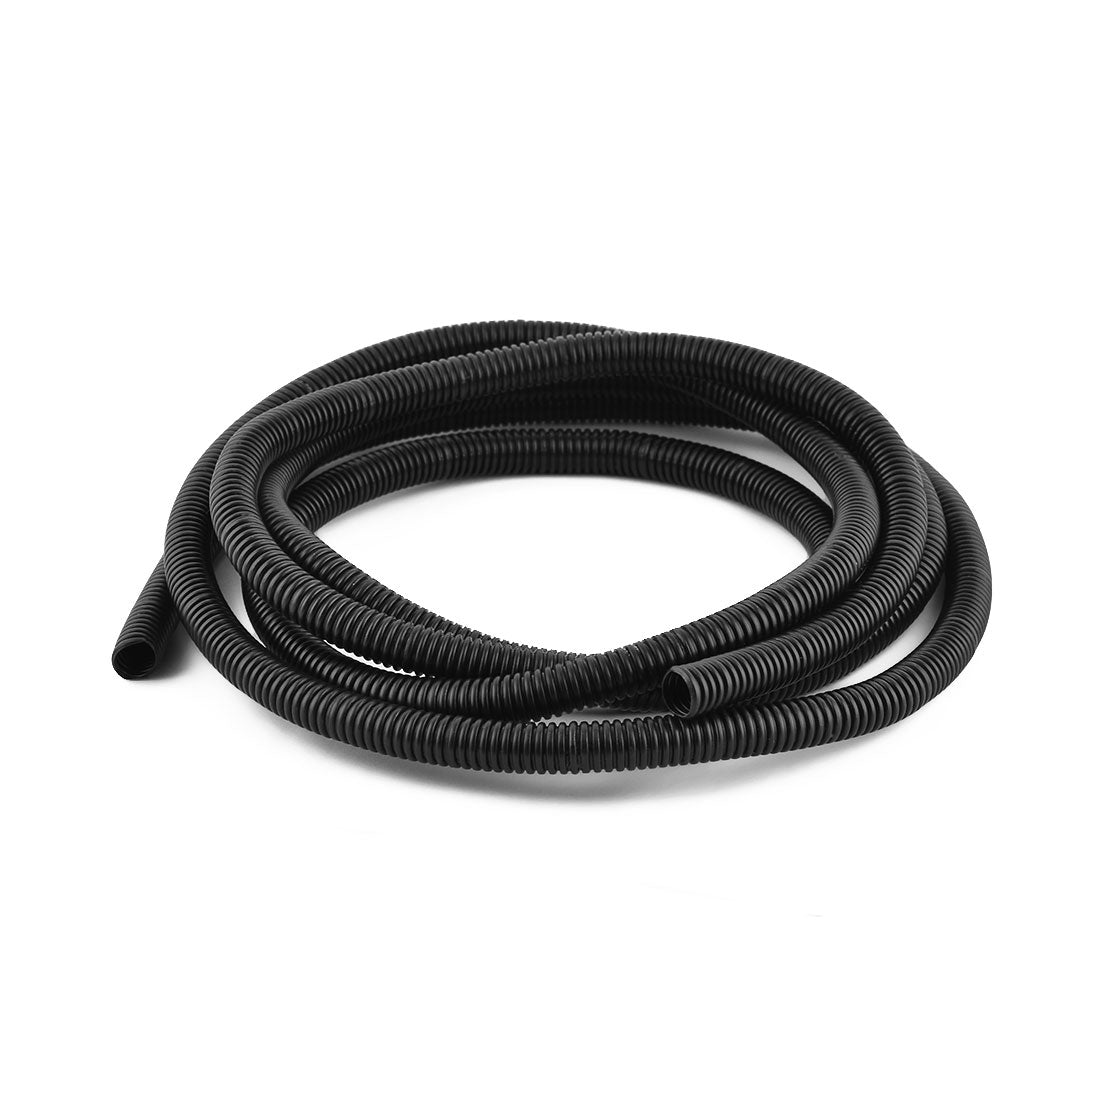 uxcell Uxcell 2.7 M 11 x 13 mm Plastic Corrugated Conduit Tube for Garden,Office Black